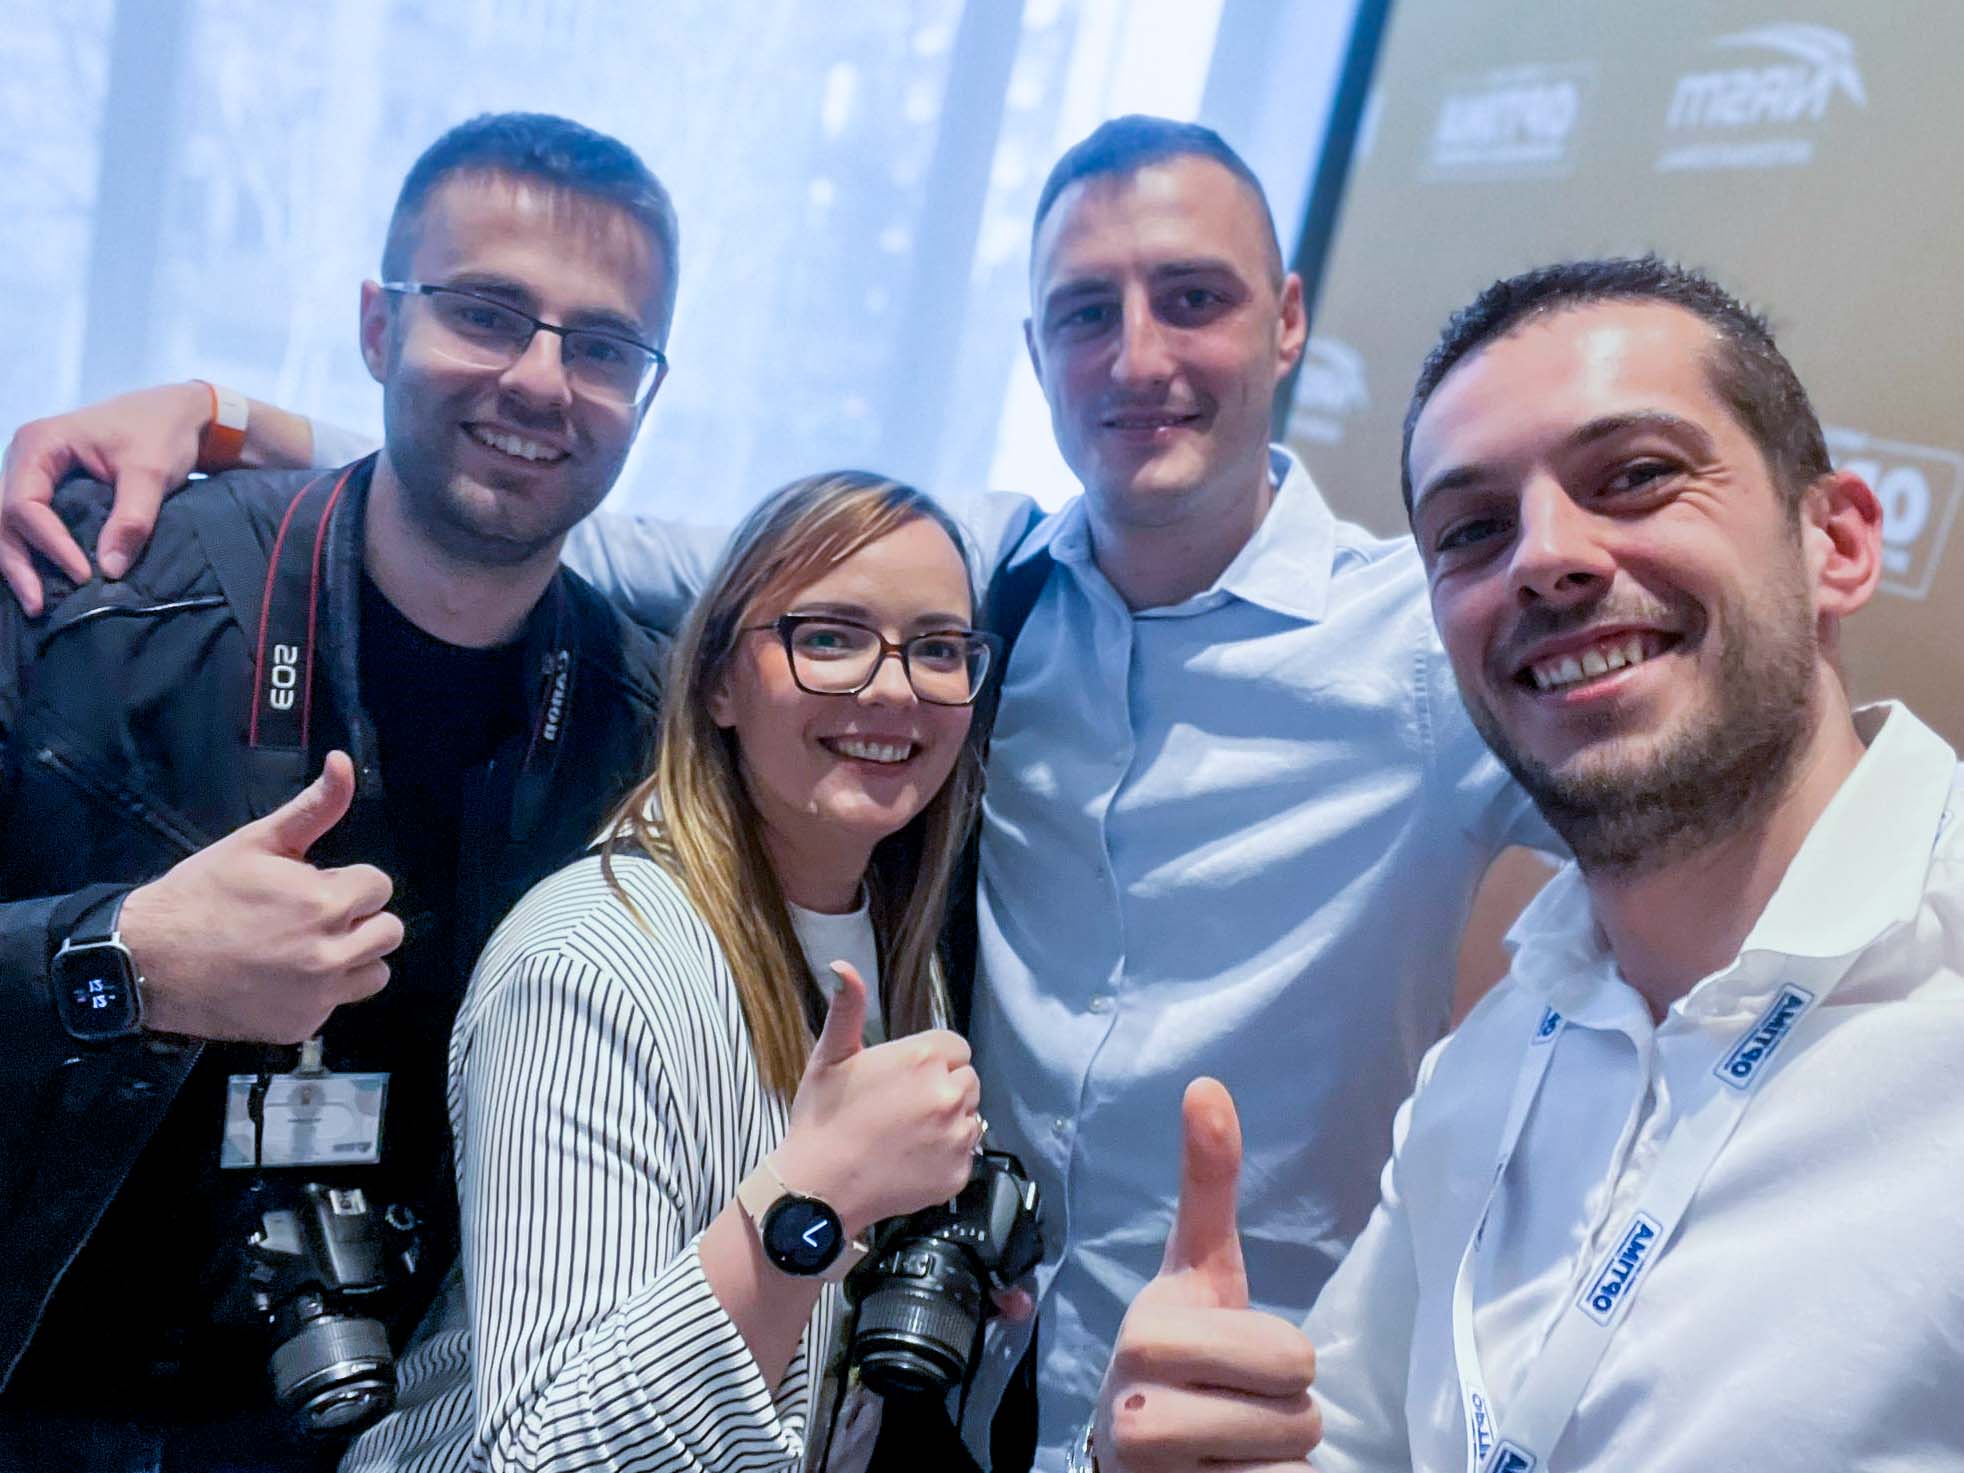 StrideStrong team with Vladimir and Uros from LevUP Digital